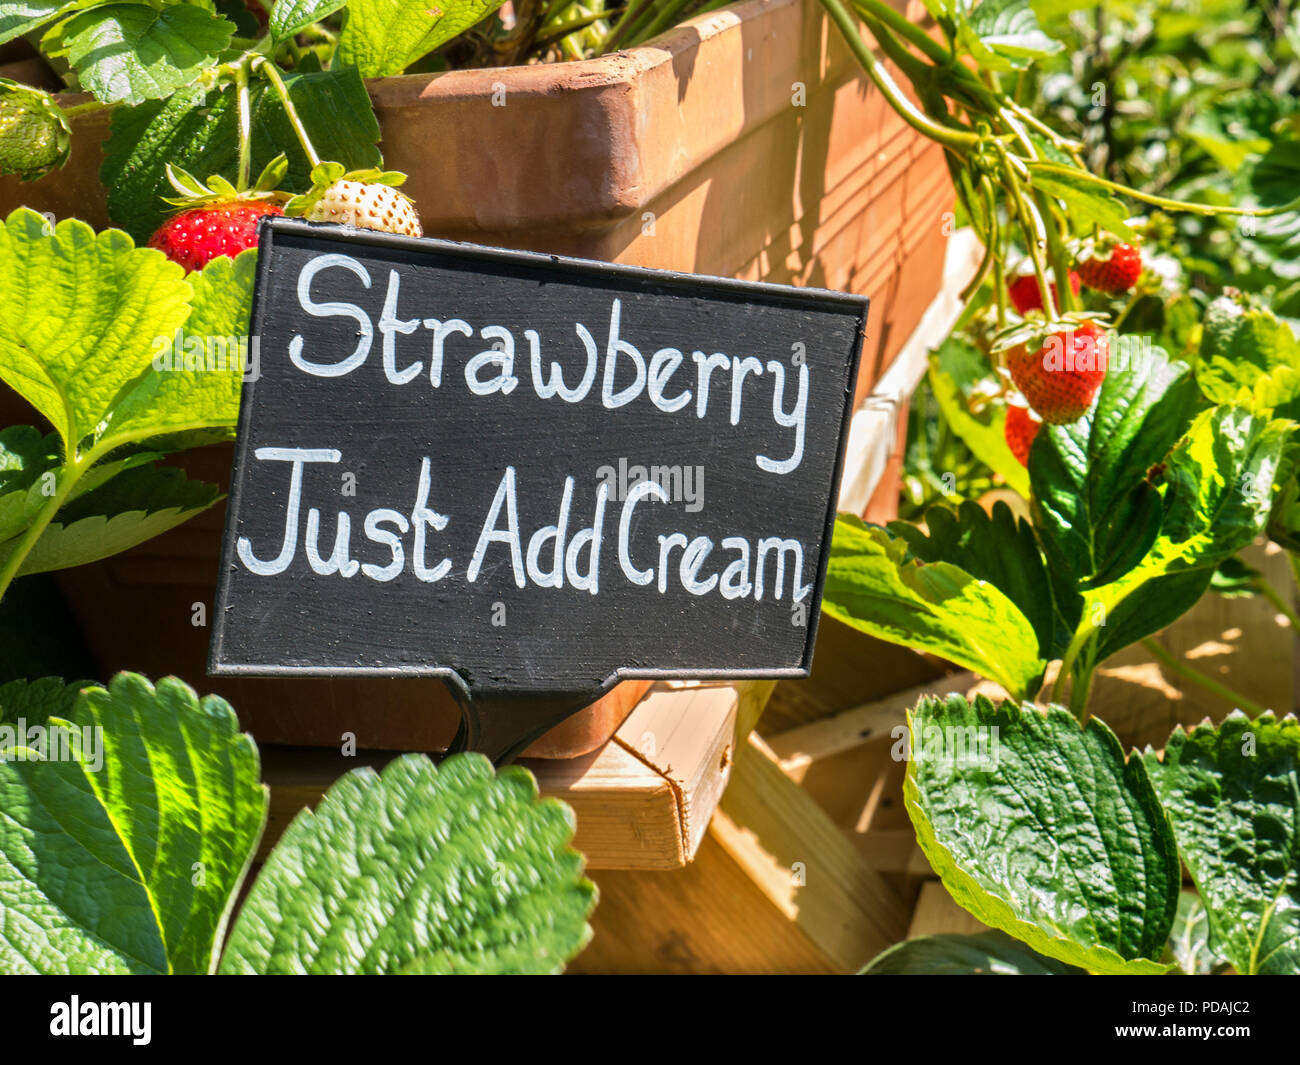 Strawberry plants on display for sale with quirky ‘Strawberry Just Add Cream’ blackboard sign horticultural fruit Market Stall Outdoors UK Stock Photo